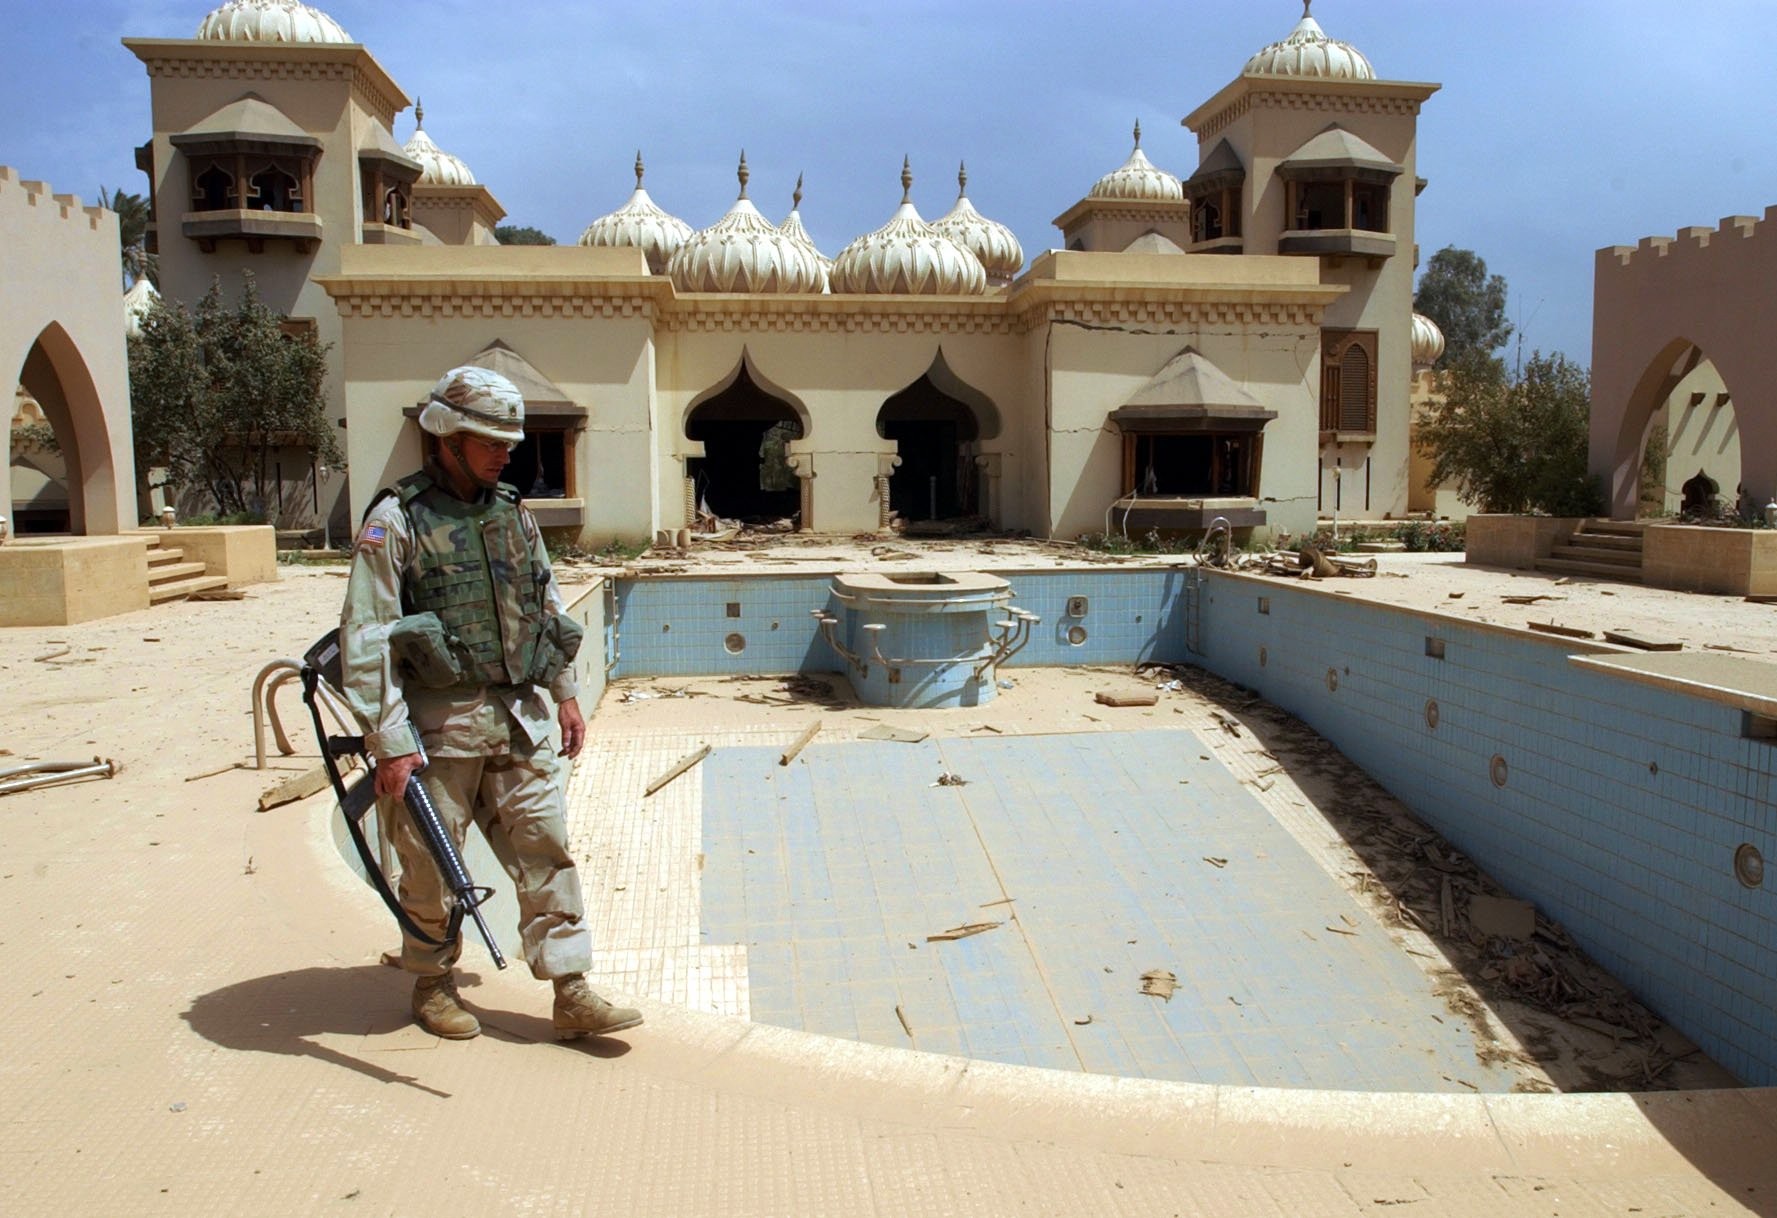 A US soldier a villa in Saddam Hussein's palace complex on the banks of the river Tigris in Baghdad in April 2003 (Peter Nicholls/The Times)